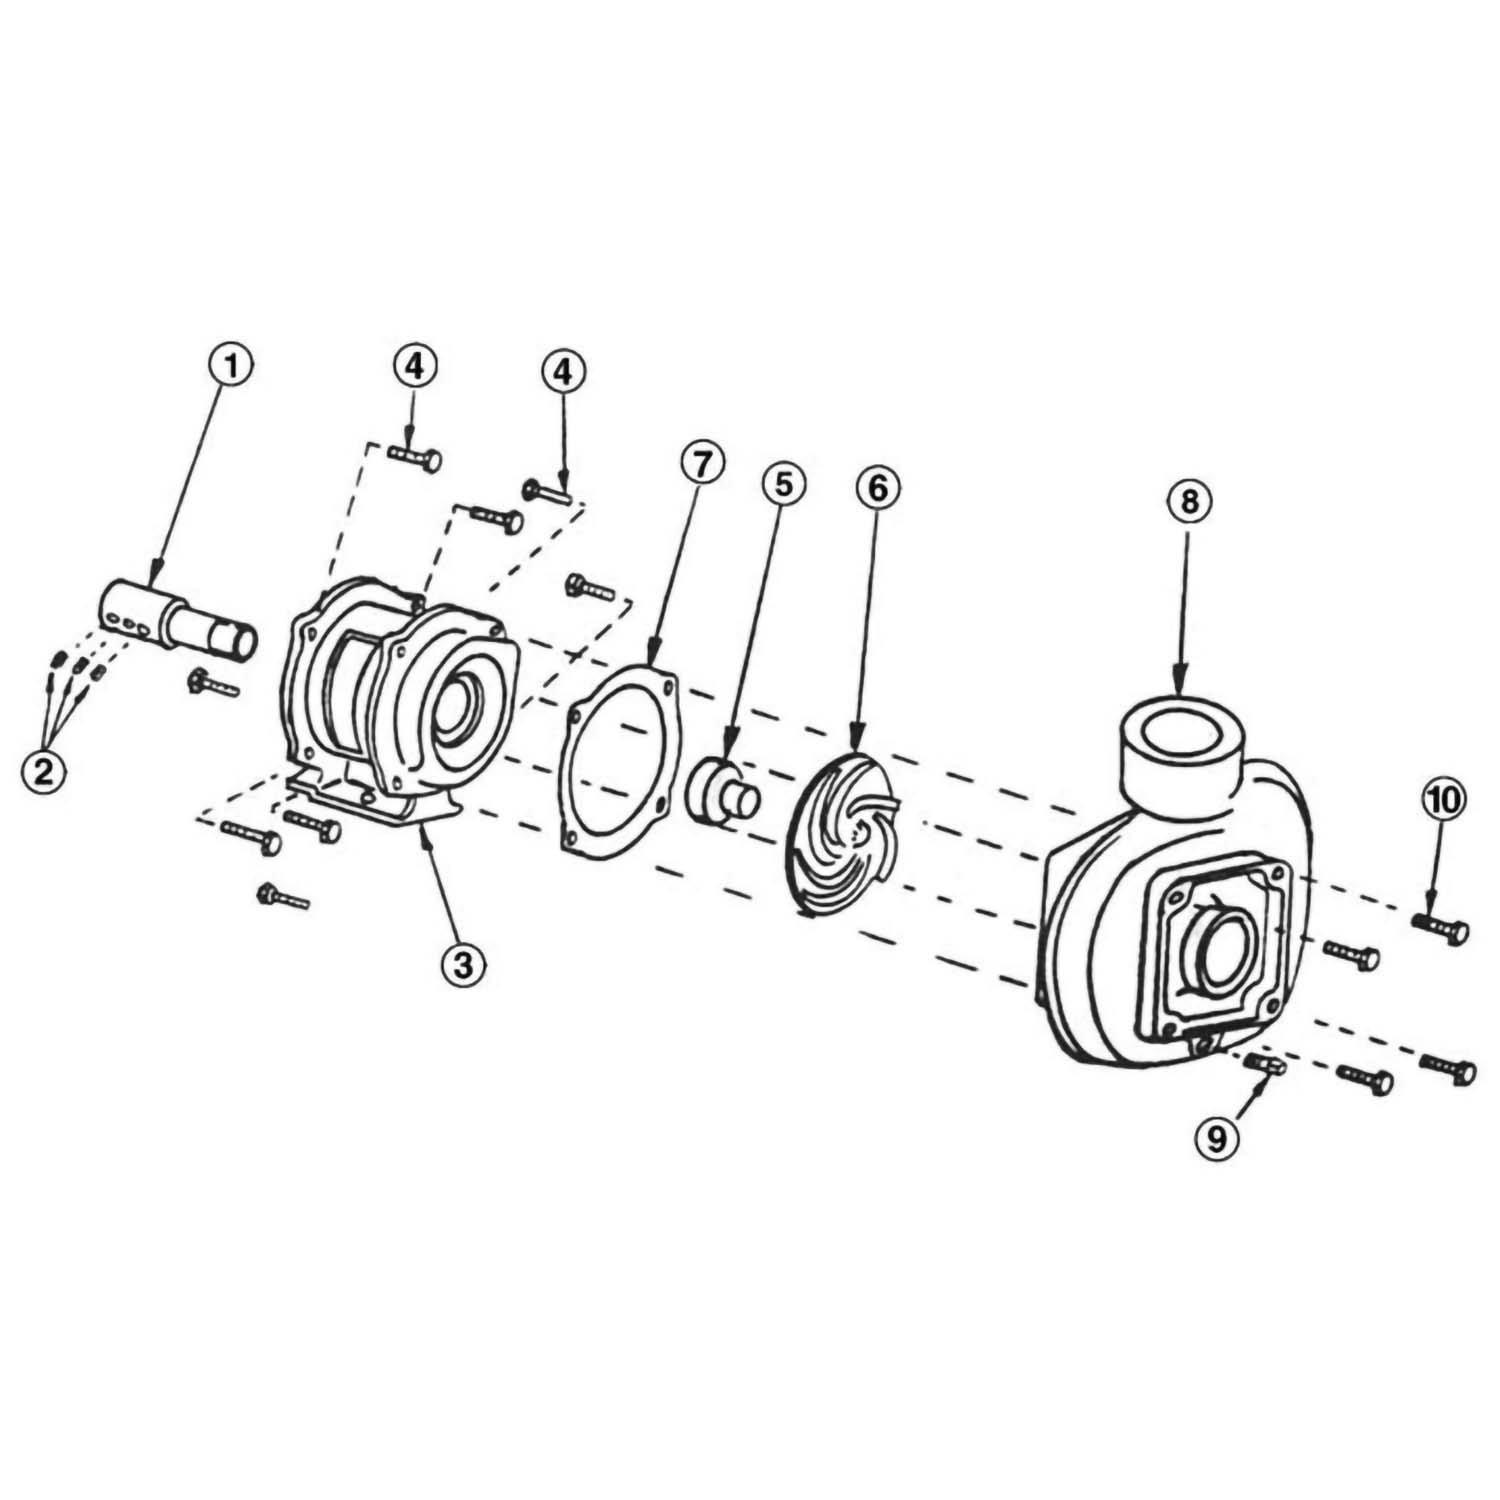 Anthony AS  AC Series Pump Part Schematic